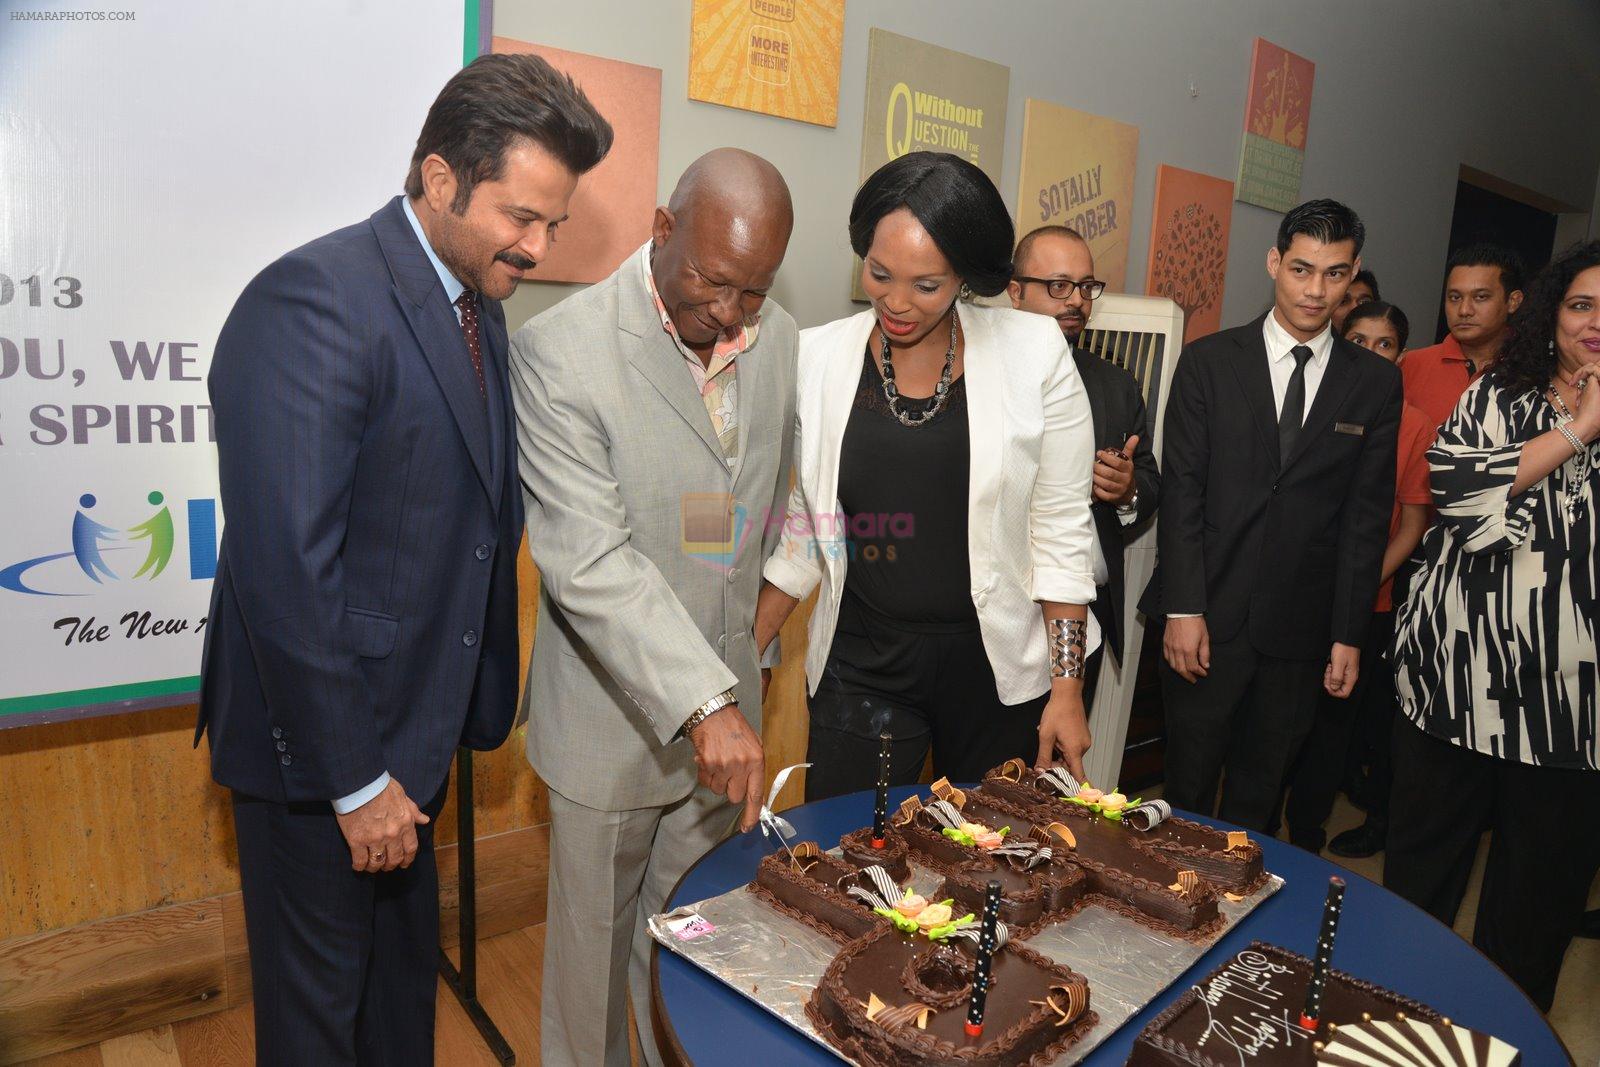 Anil Kapoor at Mandela bday celebrations in Cafe Infinito on 5th dec 2014